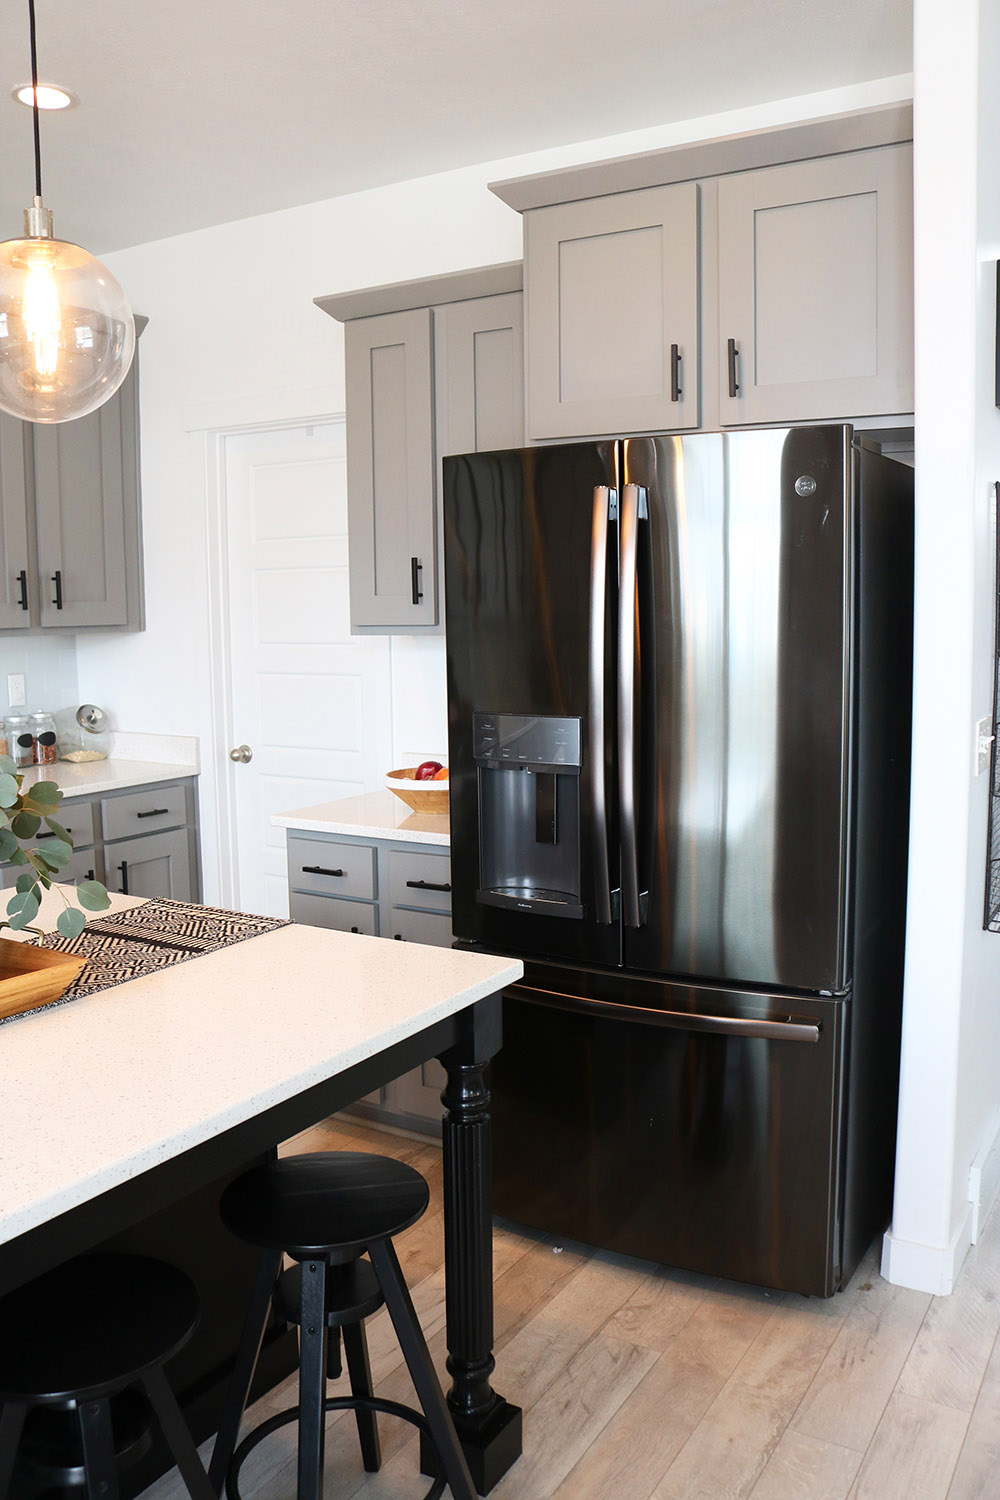 A GE black stainless steel refrigerator in a kitchen.